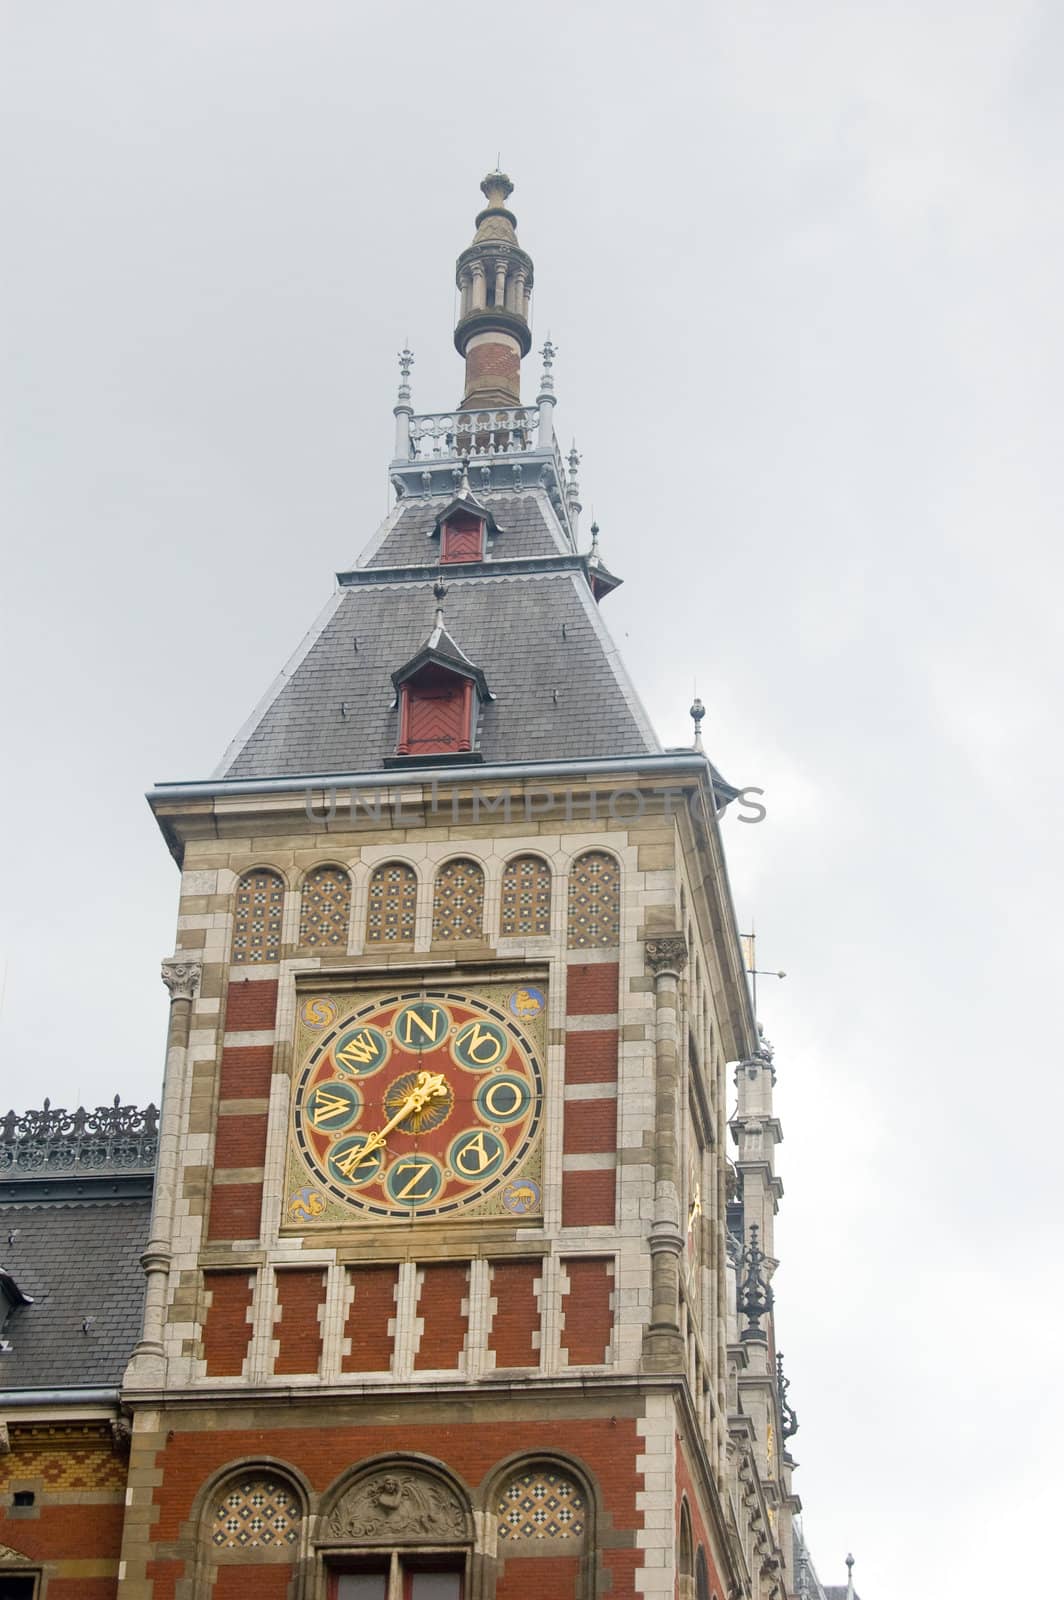 tower of central station in amsterdam, the Netherlands by ladyminnie